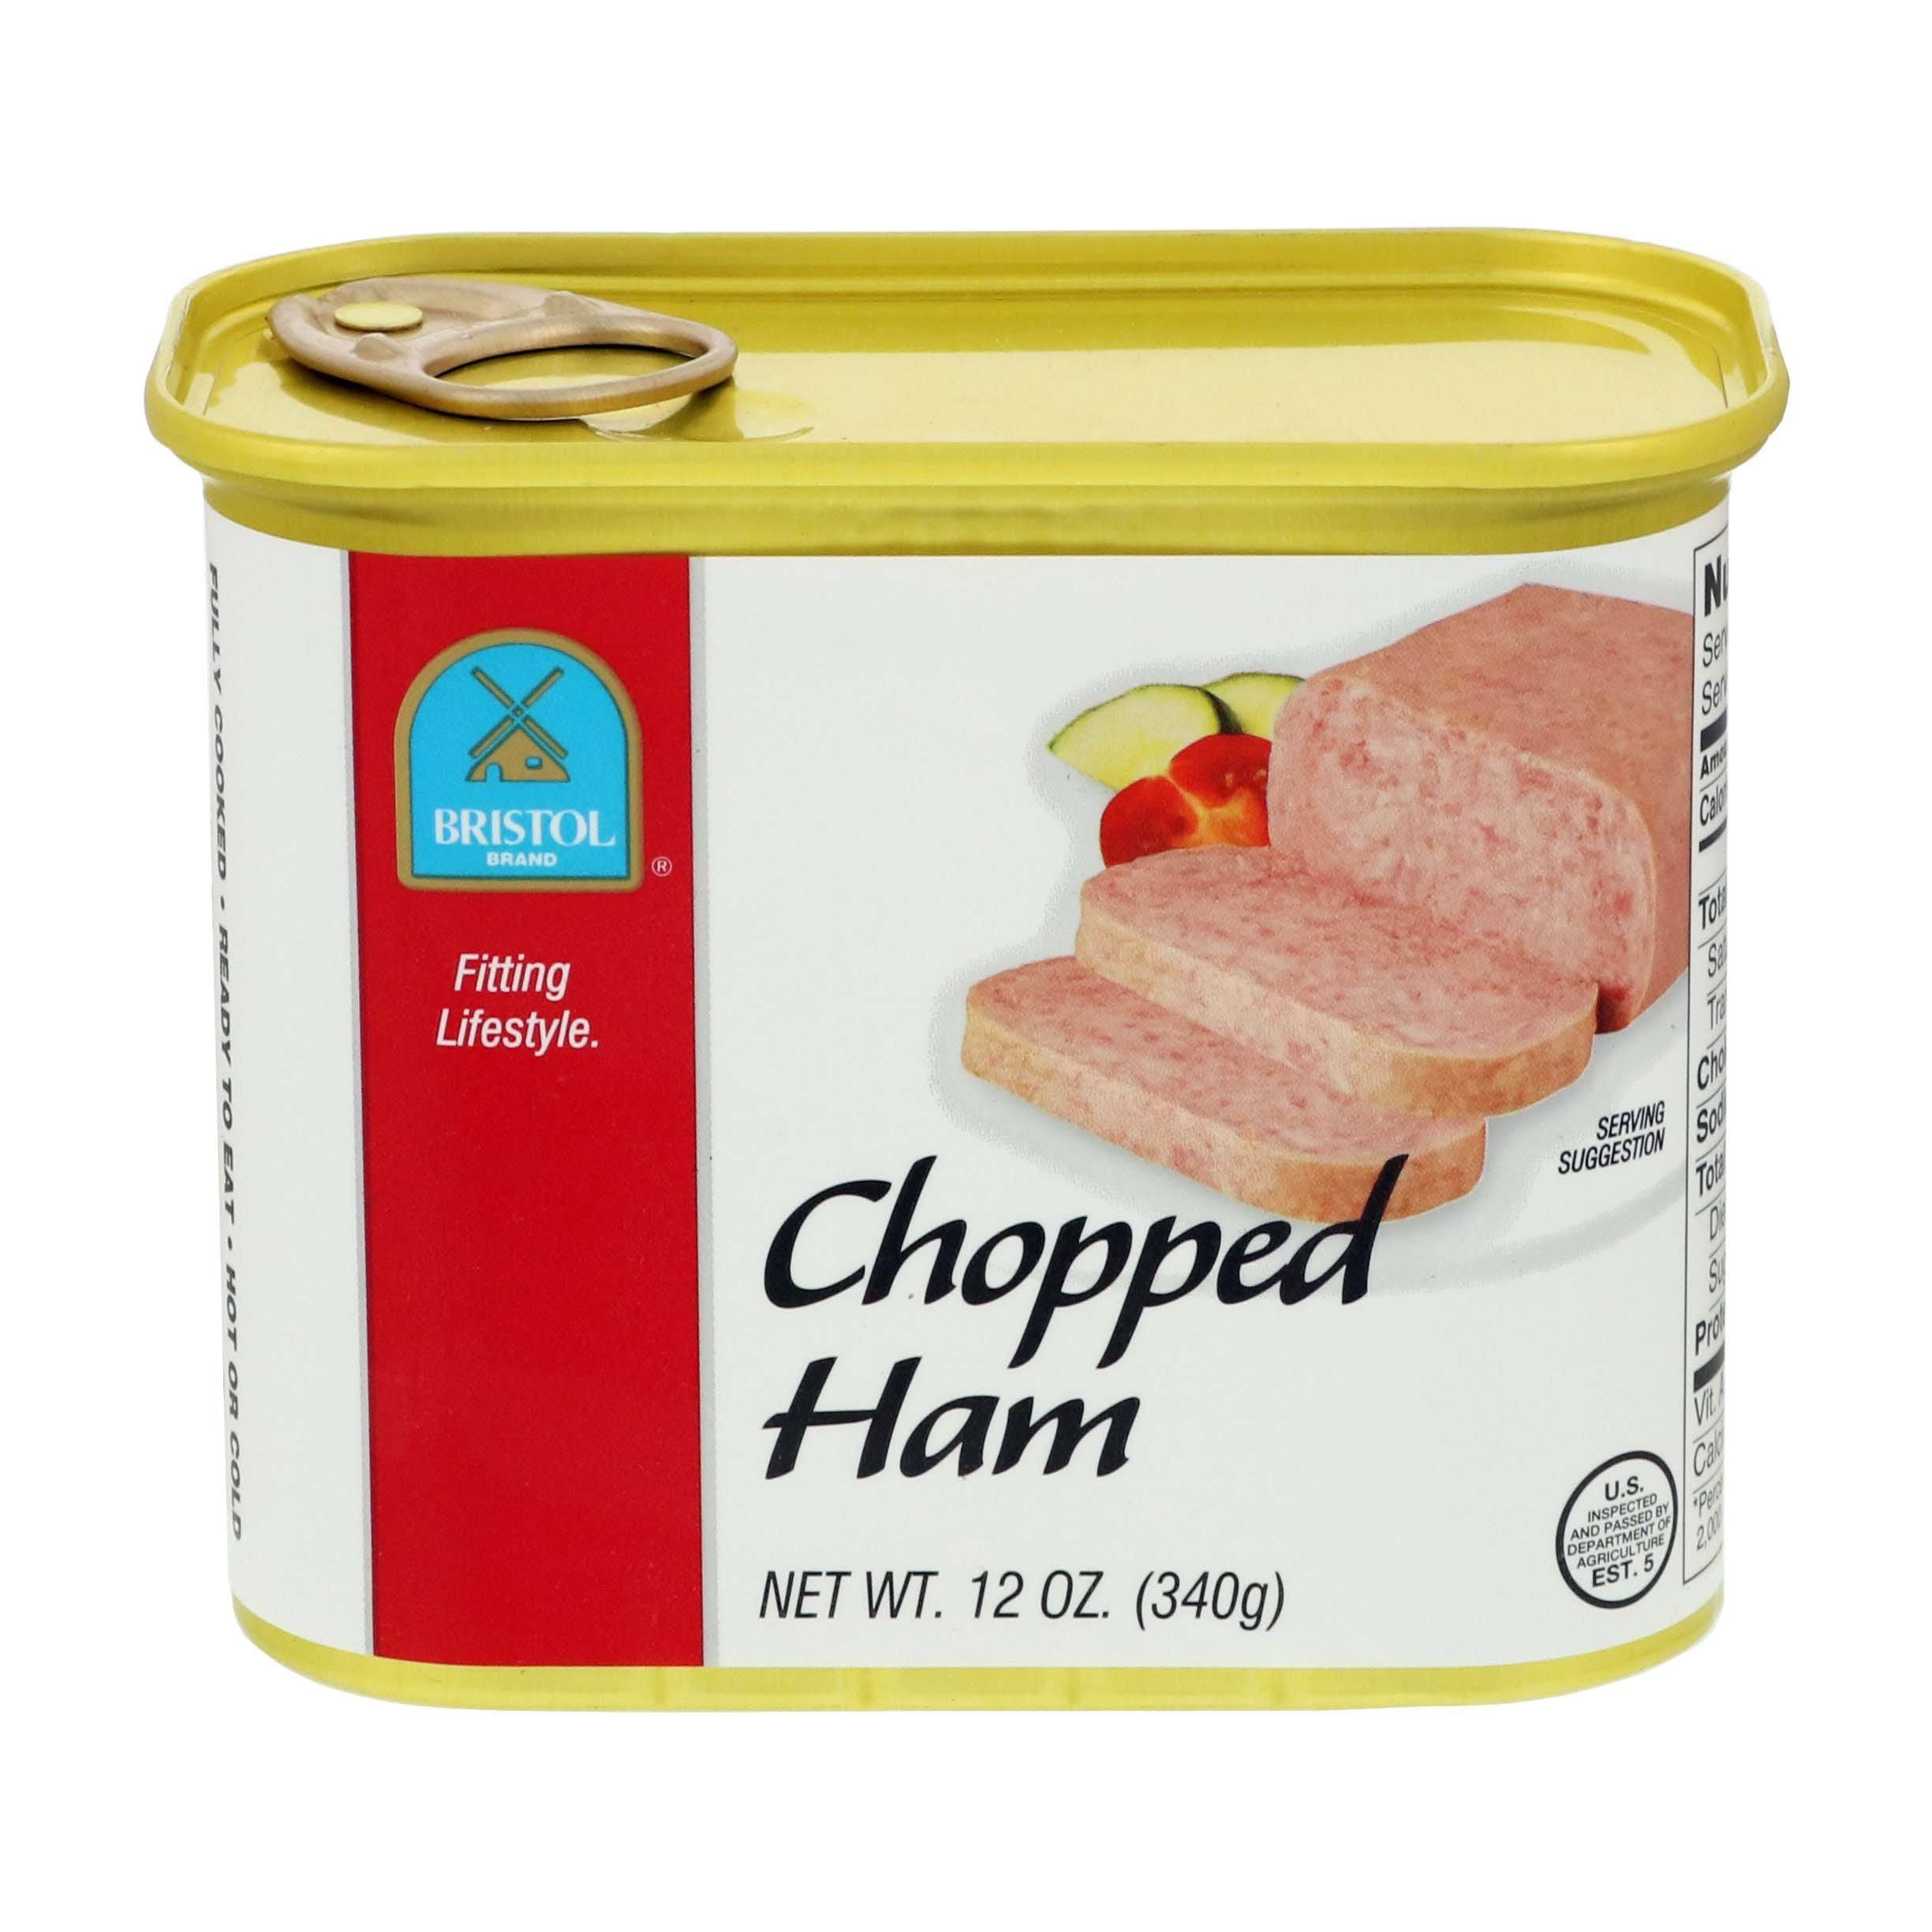 Canned Ham - Fully Cooked and Ready to Enjoy | Image